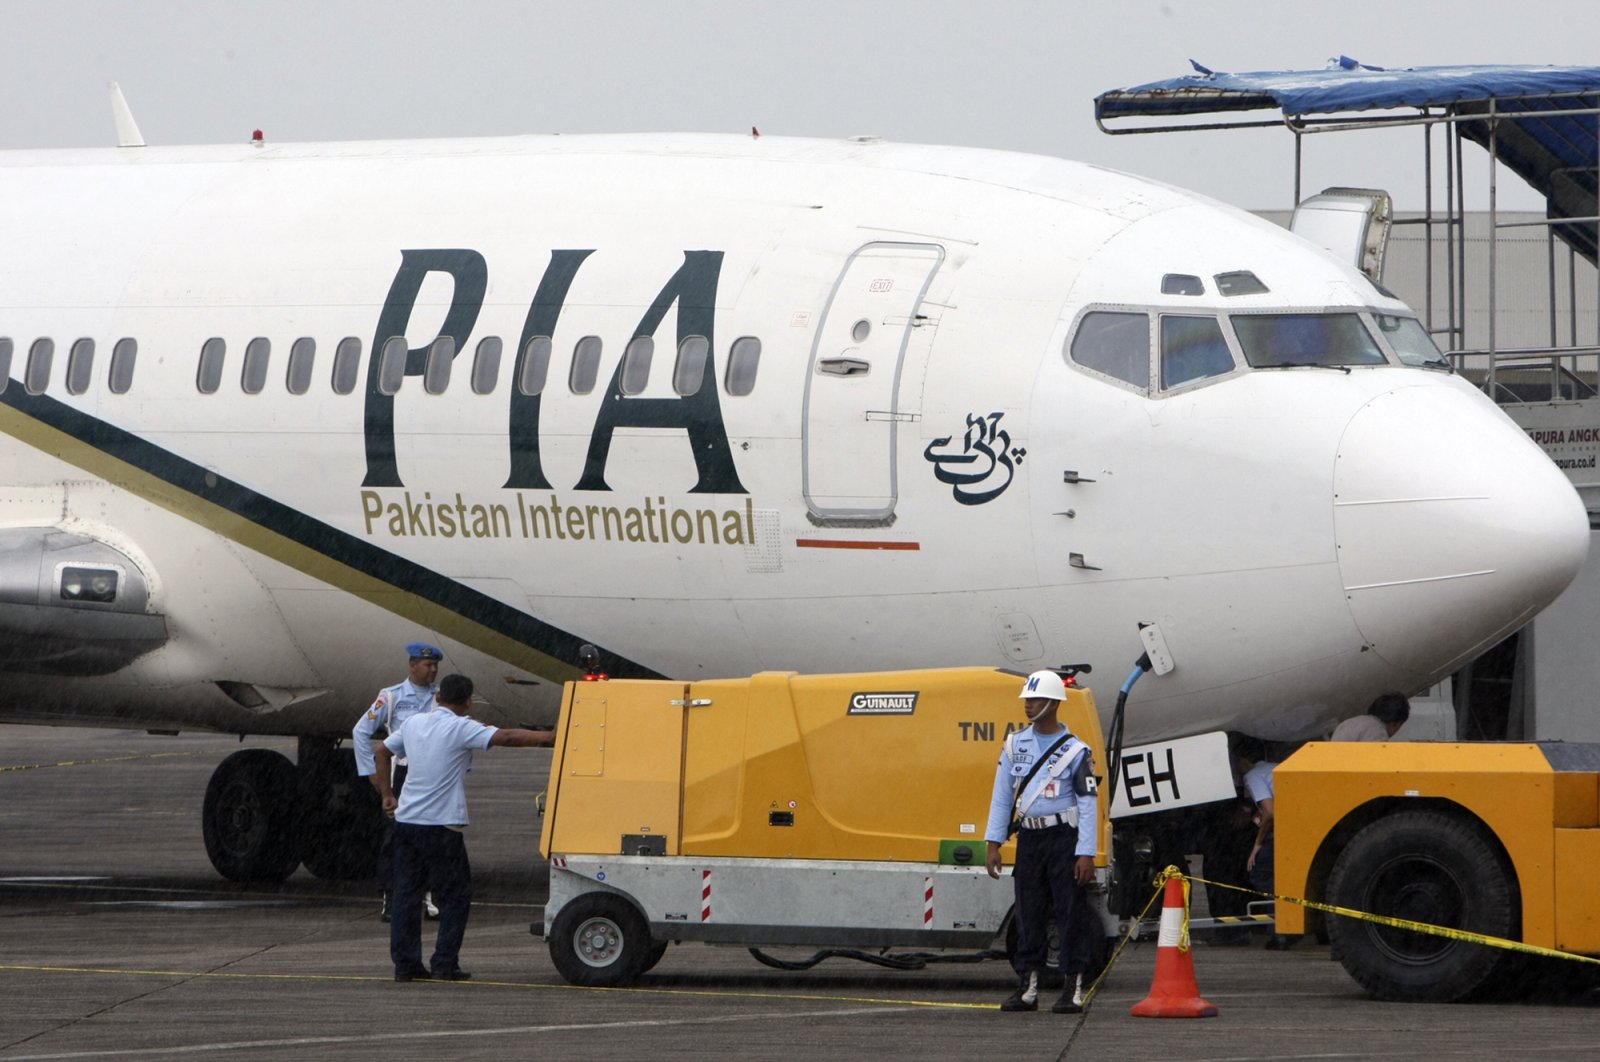 A Pakistan International Airlines passenger jet is parked on the tarmac at a military base in Makassar, Indonesia, March 7, 2011. (AP Photo)